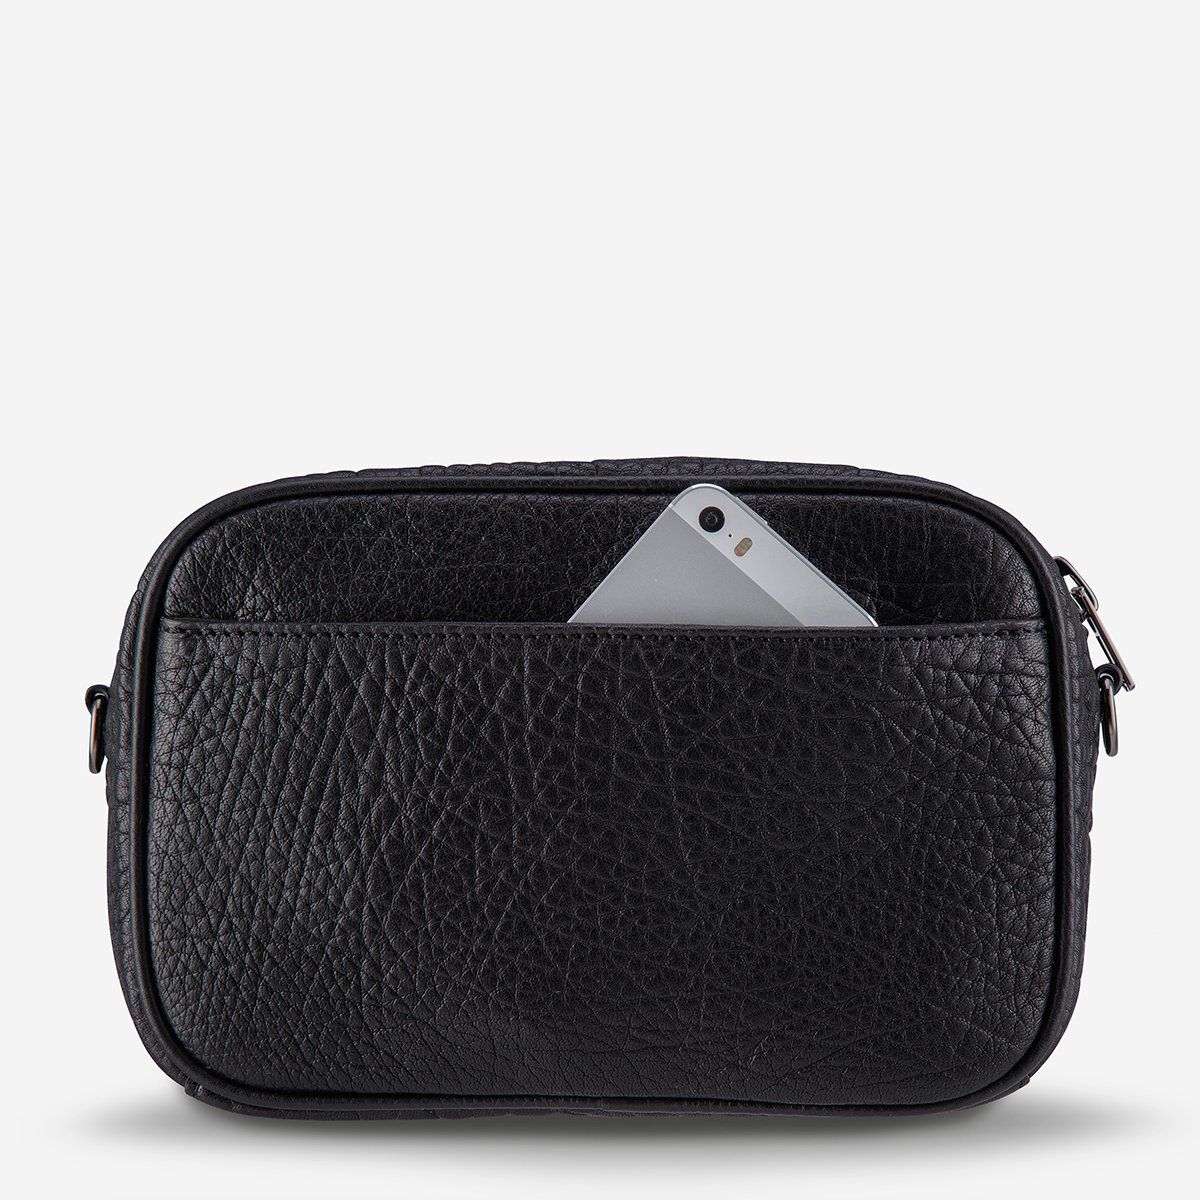 STATUS ANXIETY PLUNDER BAG  The Status Anxiety Plunder Bags the perfect everyday handbag, it easily fits your essentials. Crafted from a full grain Italian leather. The plunder bag features a slip pocket for your phone and an internal zip pocket. Complete with adjustable straps so you decide the length.  